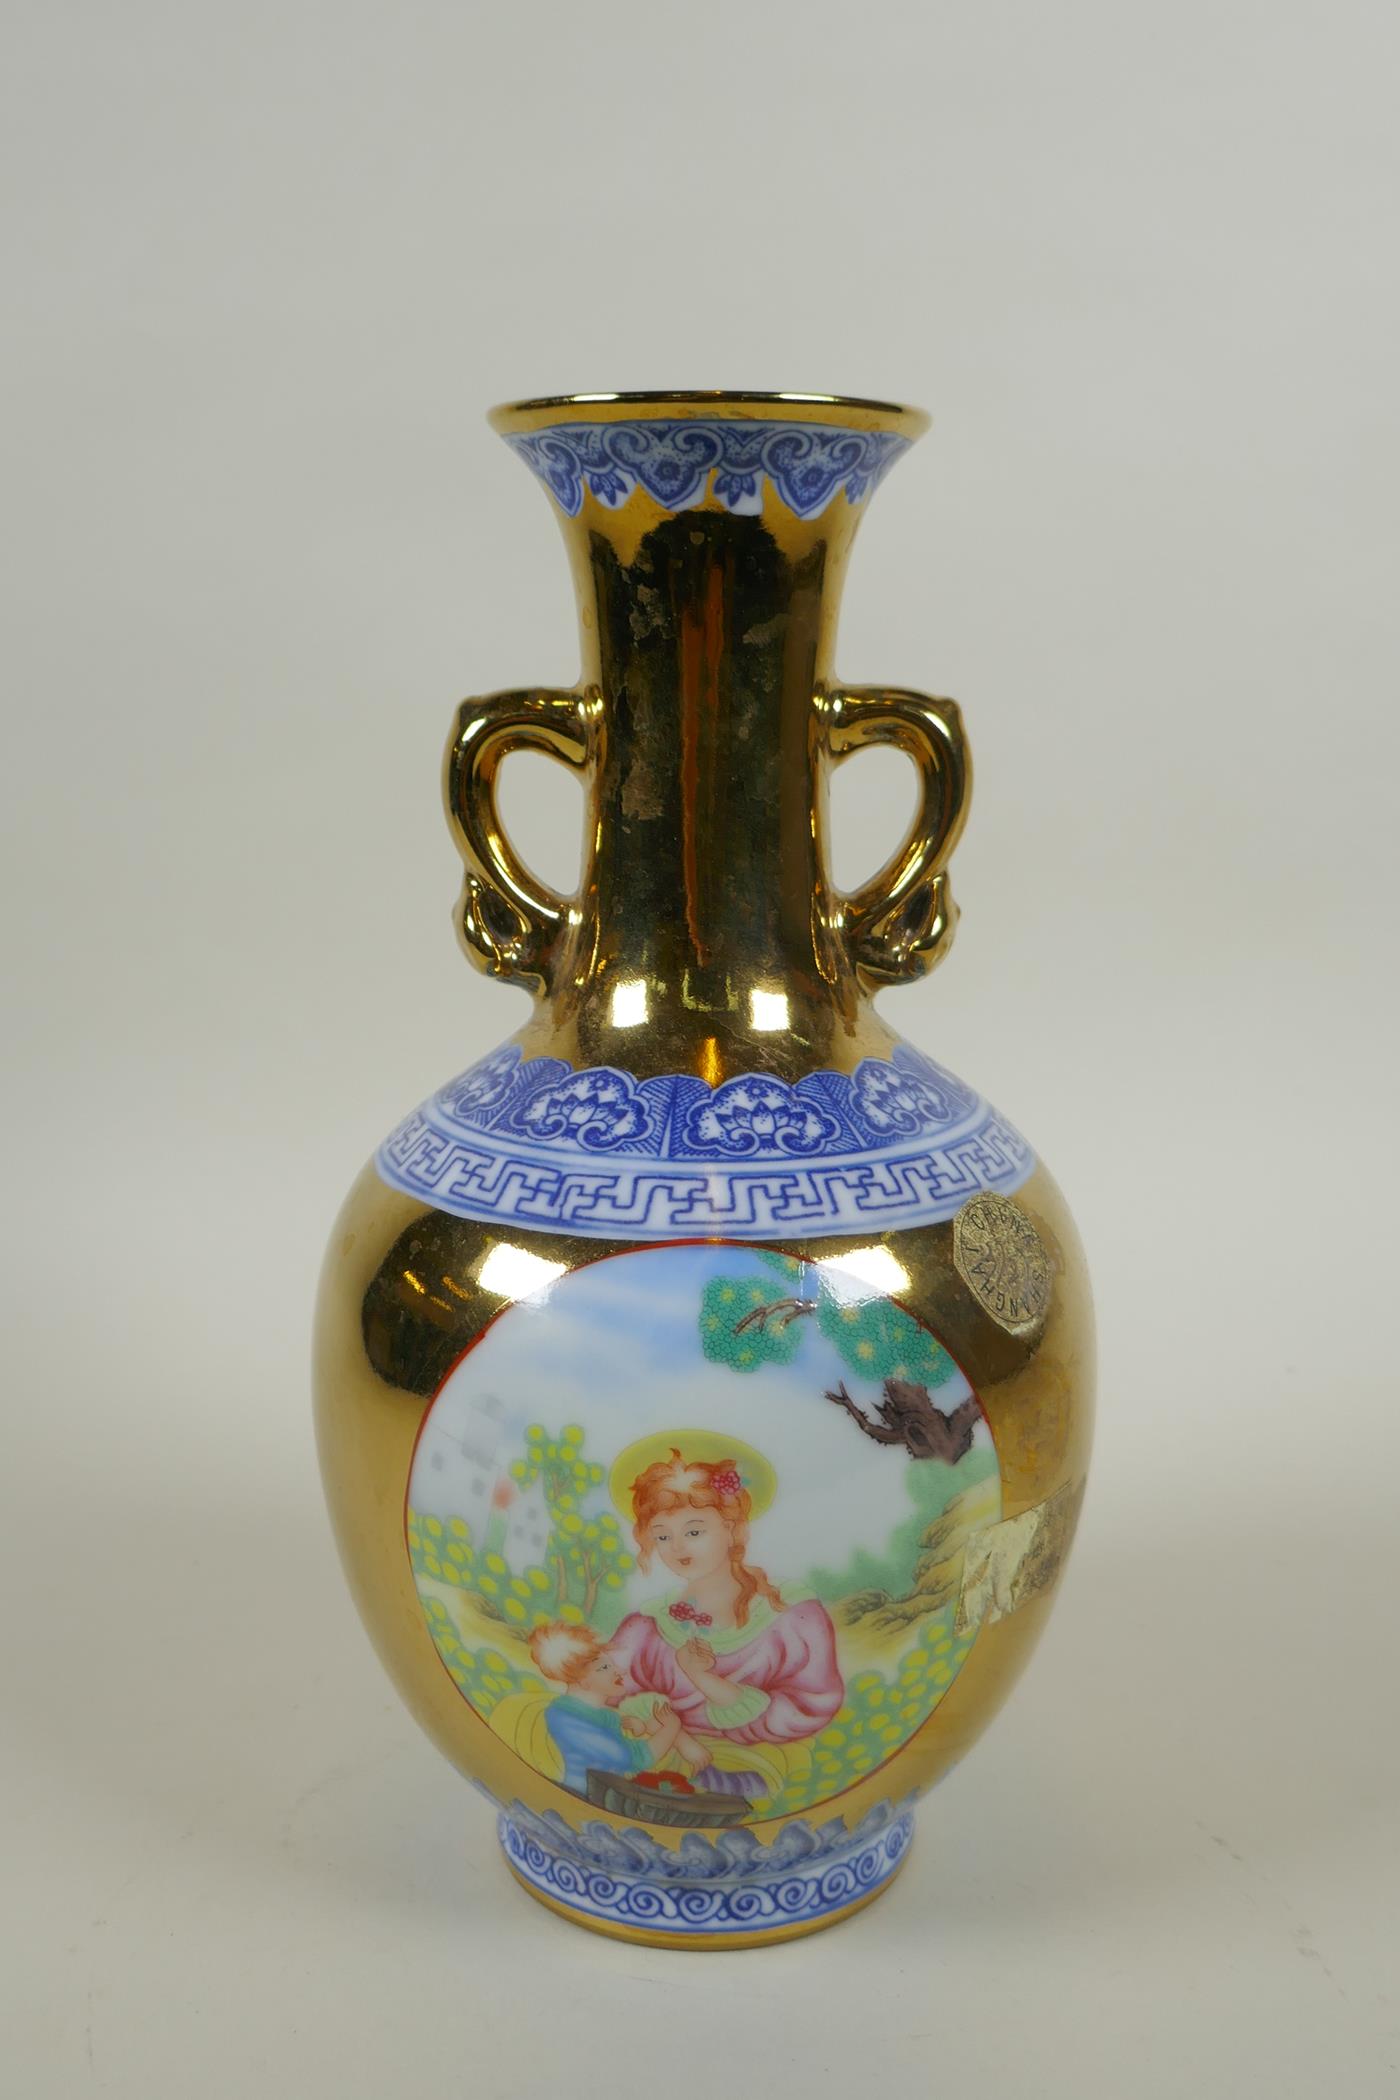 A Chinese gilt lustre and polychrome porcelain vase with two handles and decorative panels depicting